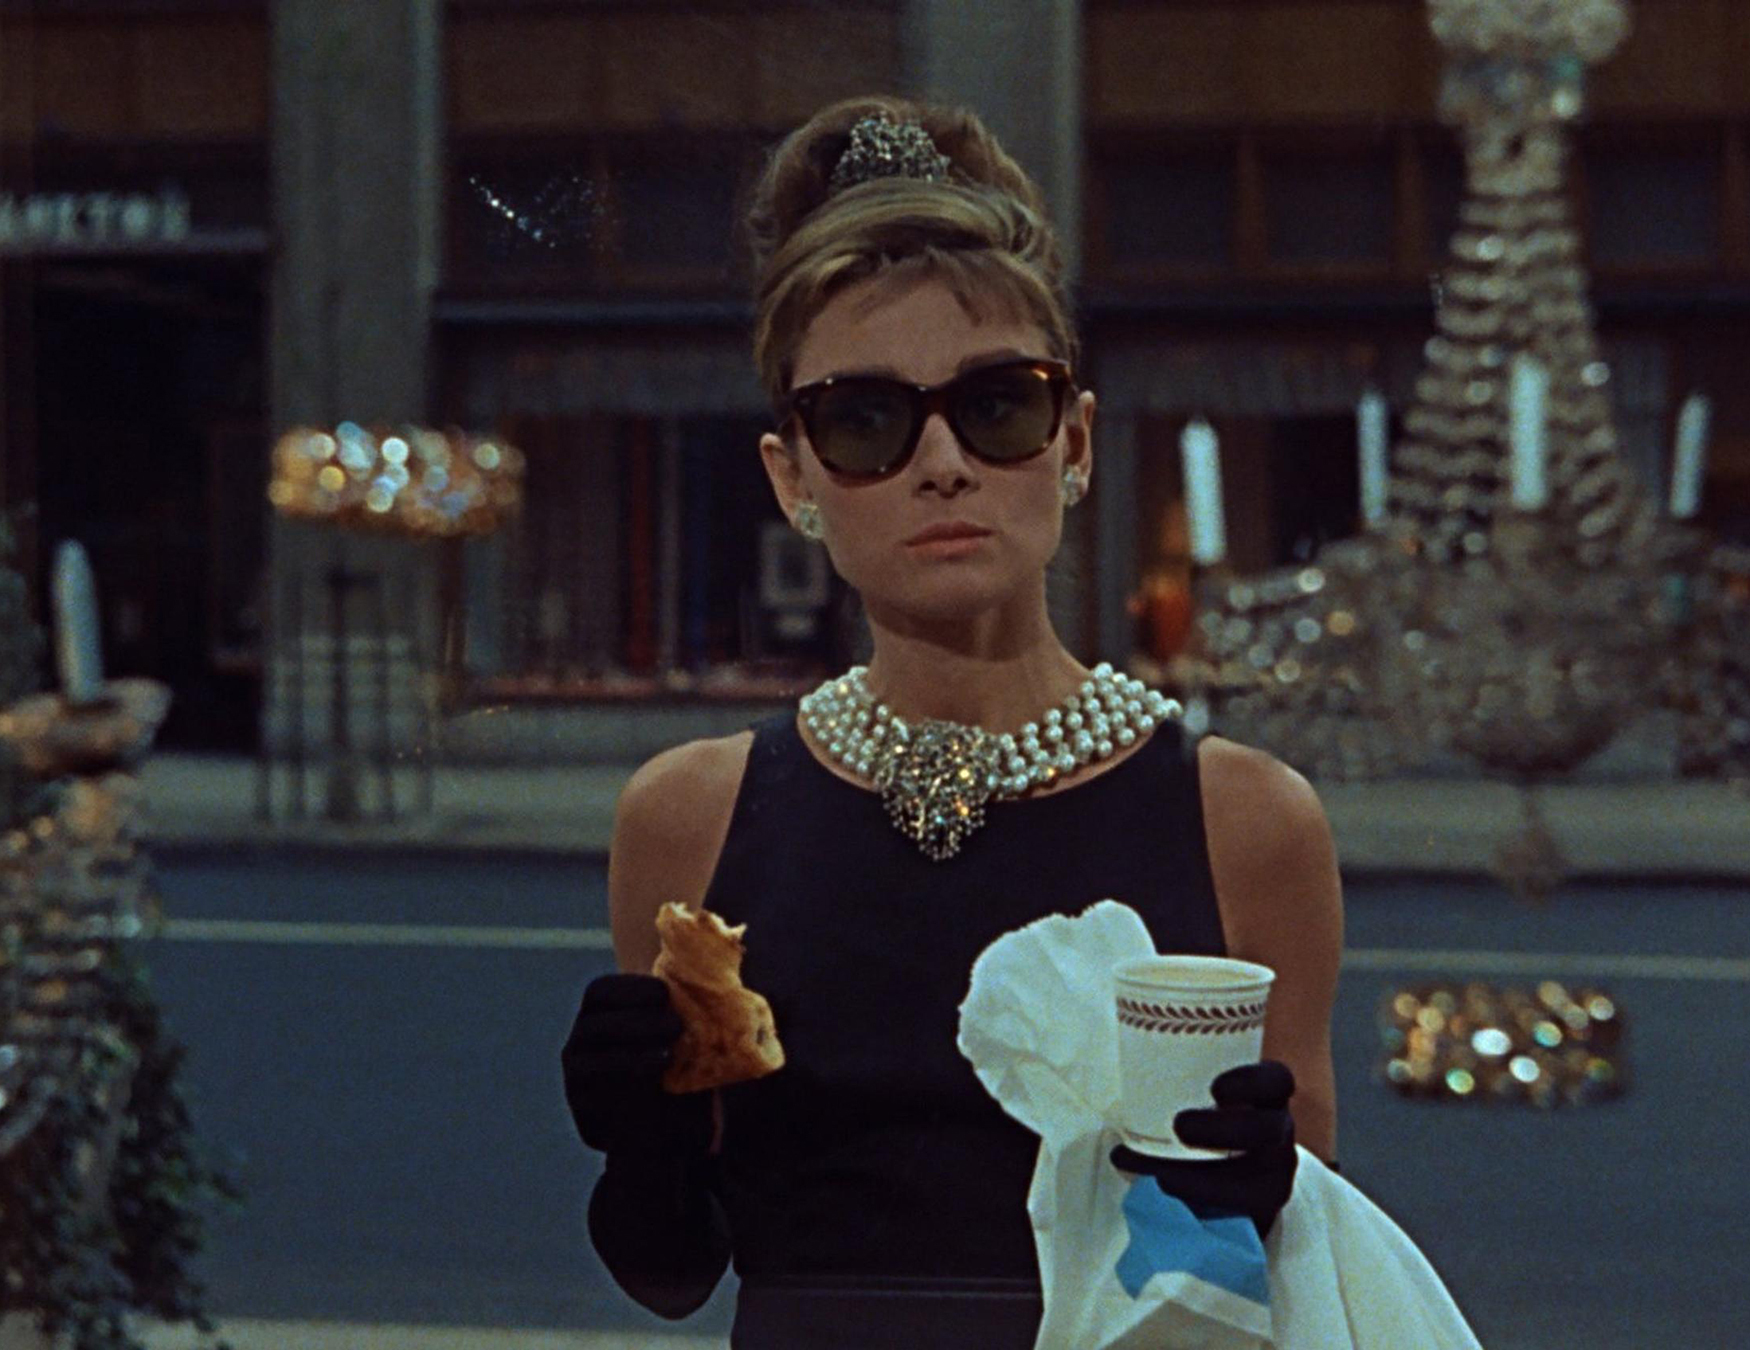 <p>While depictions of Holly Golightly <a href="https://www.goodreads.com/book/show/251688.Breakfast_at_Tiffany_s_and_Three_Stories?ac=1&from_search=true&qid=9gKWmSxd7n&rank=2" title="https://www.goodreads.com/book/show/251688.Breakfast_at_Tiffany_s_and_Three_Stories?ac=1&from_search=true&qid=9gKWmSxd7n&rank=2">in the book</a> and film versions of <a href="https://www.imdb.com/title/tt0054698/?ref_=nv_sr_srsg_3" title="https://www.imdb.com/title/tt0054698/?ref_=nv_sr_srsg_3"><em>Breakfast at Tiffany's</em></a> are similar, the stories take many different turns. Perhaps it's the 1960s versus the 1940s, a tidy romantic ending versus an unromantic, open-ended conclusion, or simply <a href="https://www.bbc.com/culture/article/20160412-breakfast-at-tiffanys-how-hollywood-retold-a-gritty-story" title="https://www.bbc.com/culture/article/20160412-breakfast-at-tiffanys-how-hollywood-retold-a-gritty-story">Audrey Hepburn's on-screen magnetism</a>. Whatever the reason, the movie version has a much bigger fan base than the book. In fact, the <a href="https://www.popmatters.com/breakfast-at-tiffanys-page-vs-screen-2495882897.html" title="https://www.popmatters.com/breakfast-at-tiffanys-page-vs-screen-2495882897.html">film has become a classic</a> enjoyed by each new generation, while the book has become something fans of the film check out after viewing.</p>